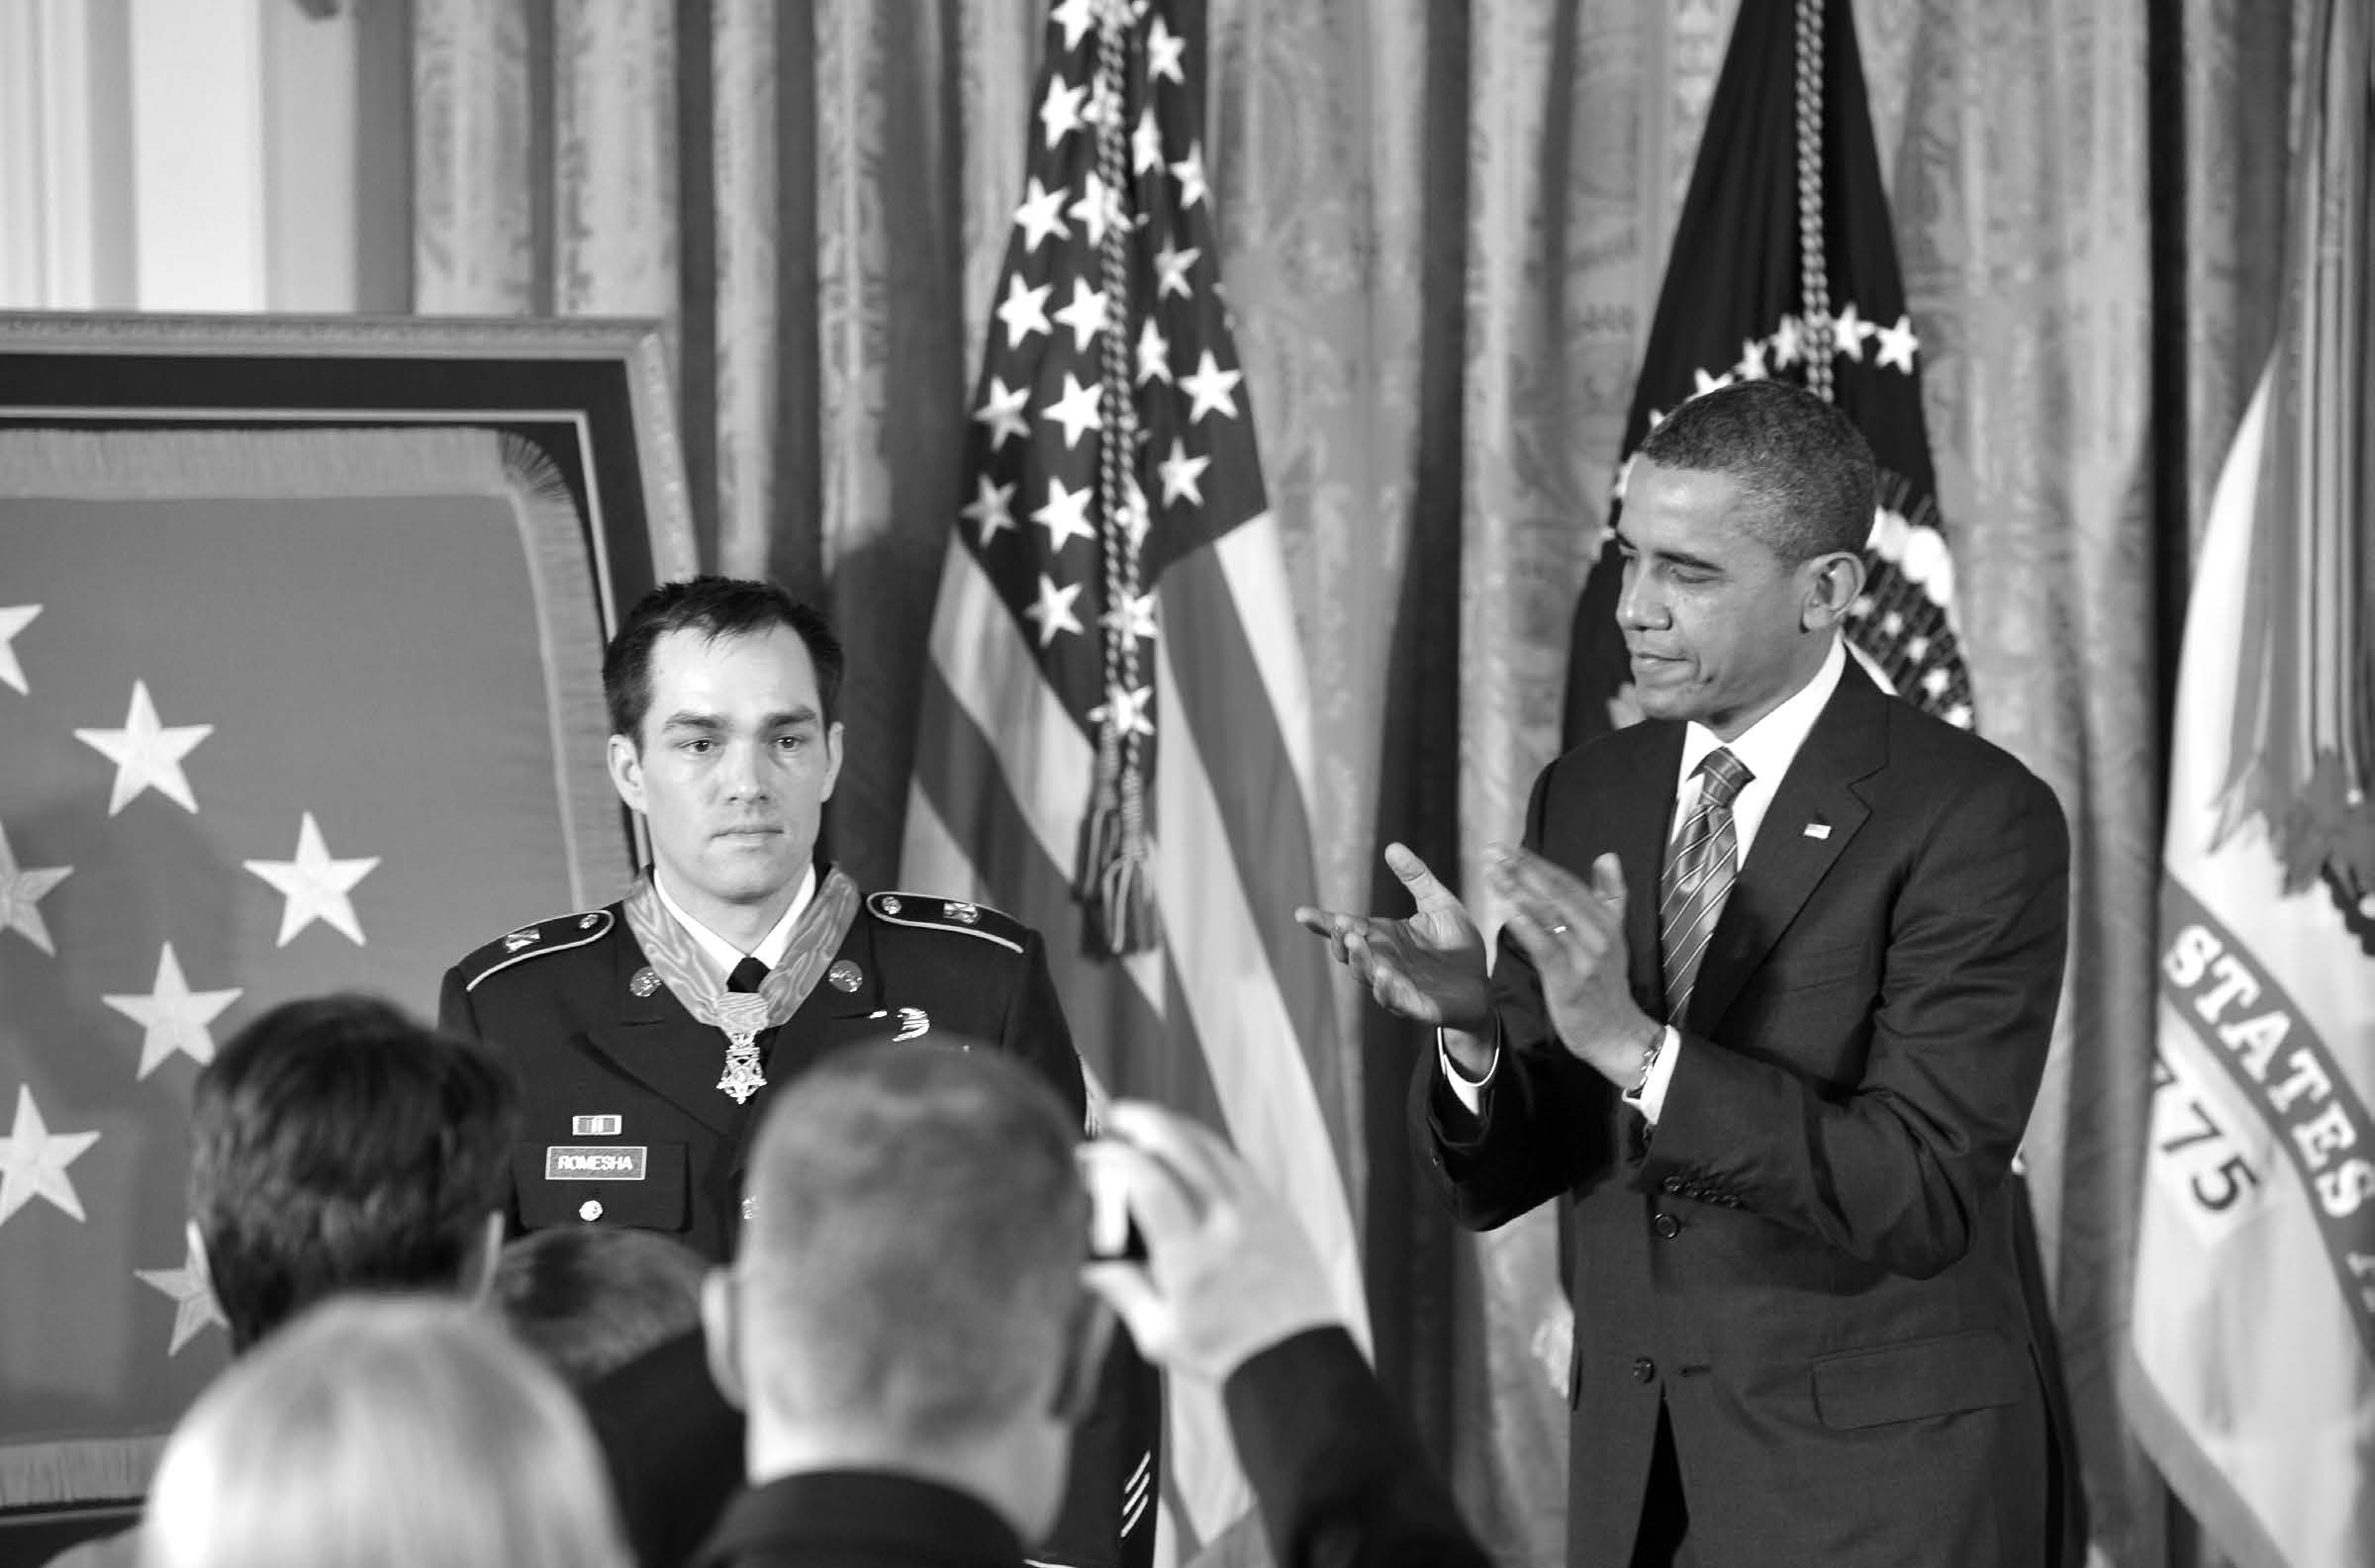 President Barack H. Obama awarded former Staff Sergeant Clinton Romesha the Medal of Honor for conspicuous gallantry in Afghanistan during a ceremony in the East Room of the White House on February 11, 2013. Courtesy of DoD.